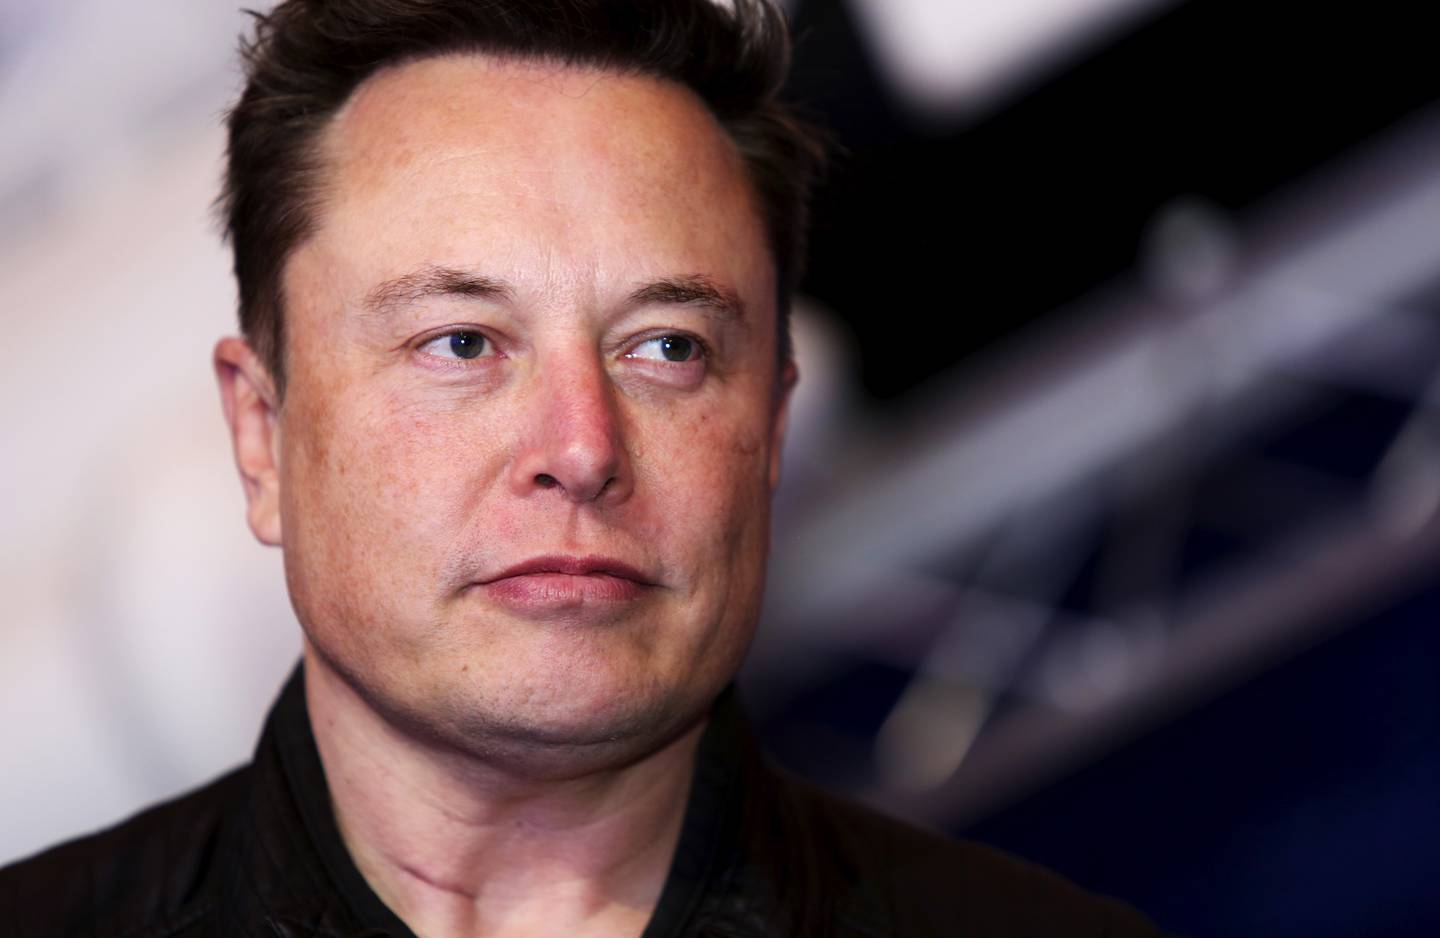 Mexico's president will speak to Musk by phone regarding plans for a Tesla plant in Mexico, and suggest alternative sites for its location due to water shortages in the country's north.